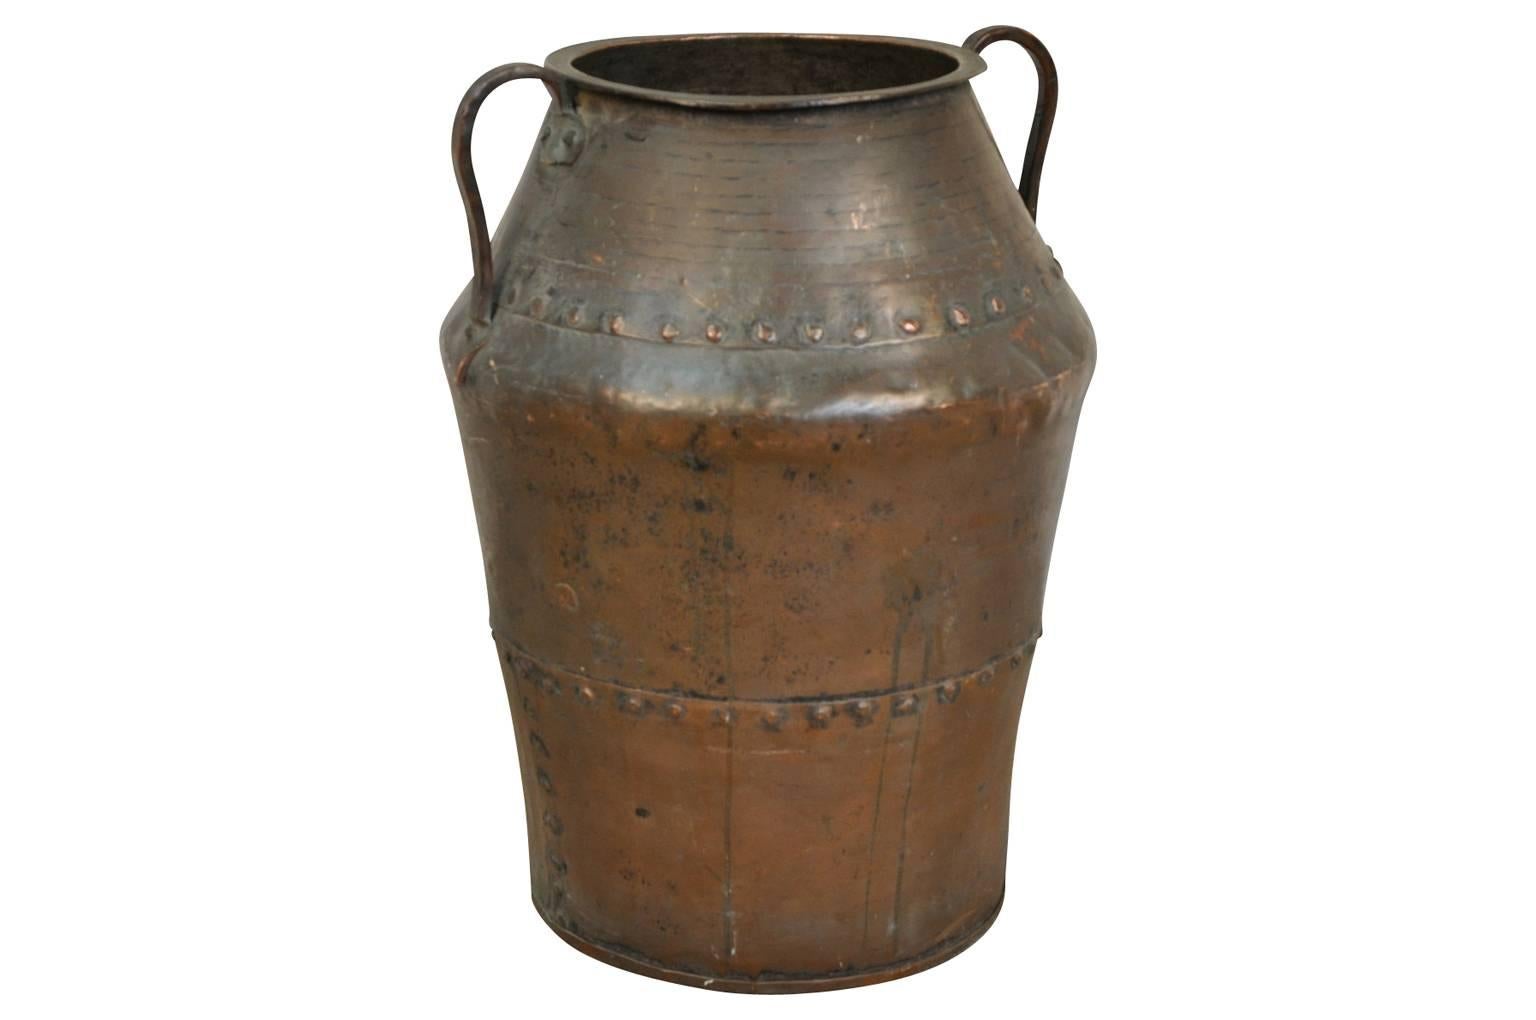 A terrific 18th century copper vessel from Northern Italy. Wonderfully crafted in riveted heavy gauge copper. An excellent umbrella or planted as a jardiniere.